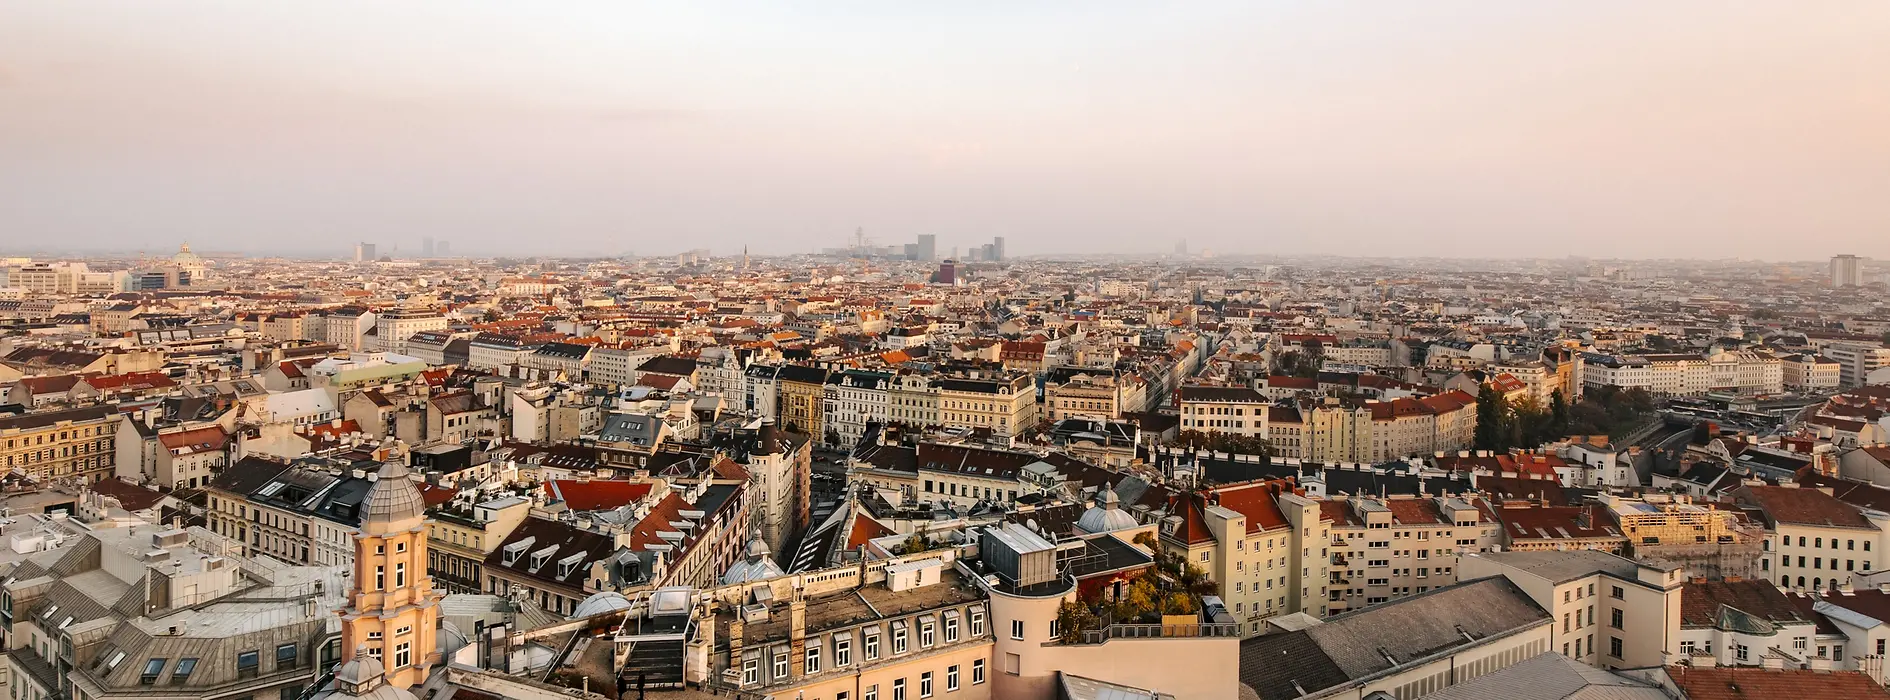 View from a roof terrace over Vienna's sea of houses